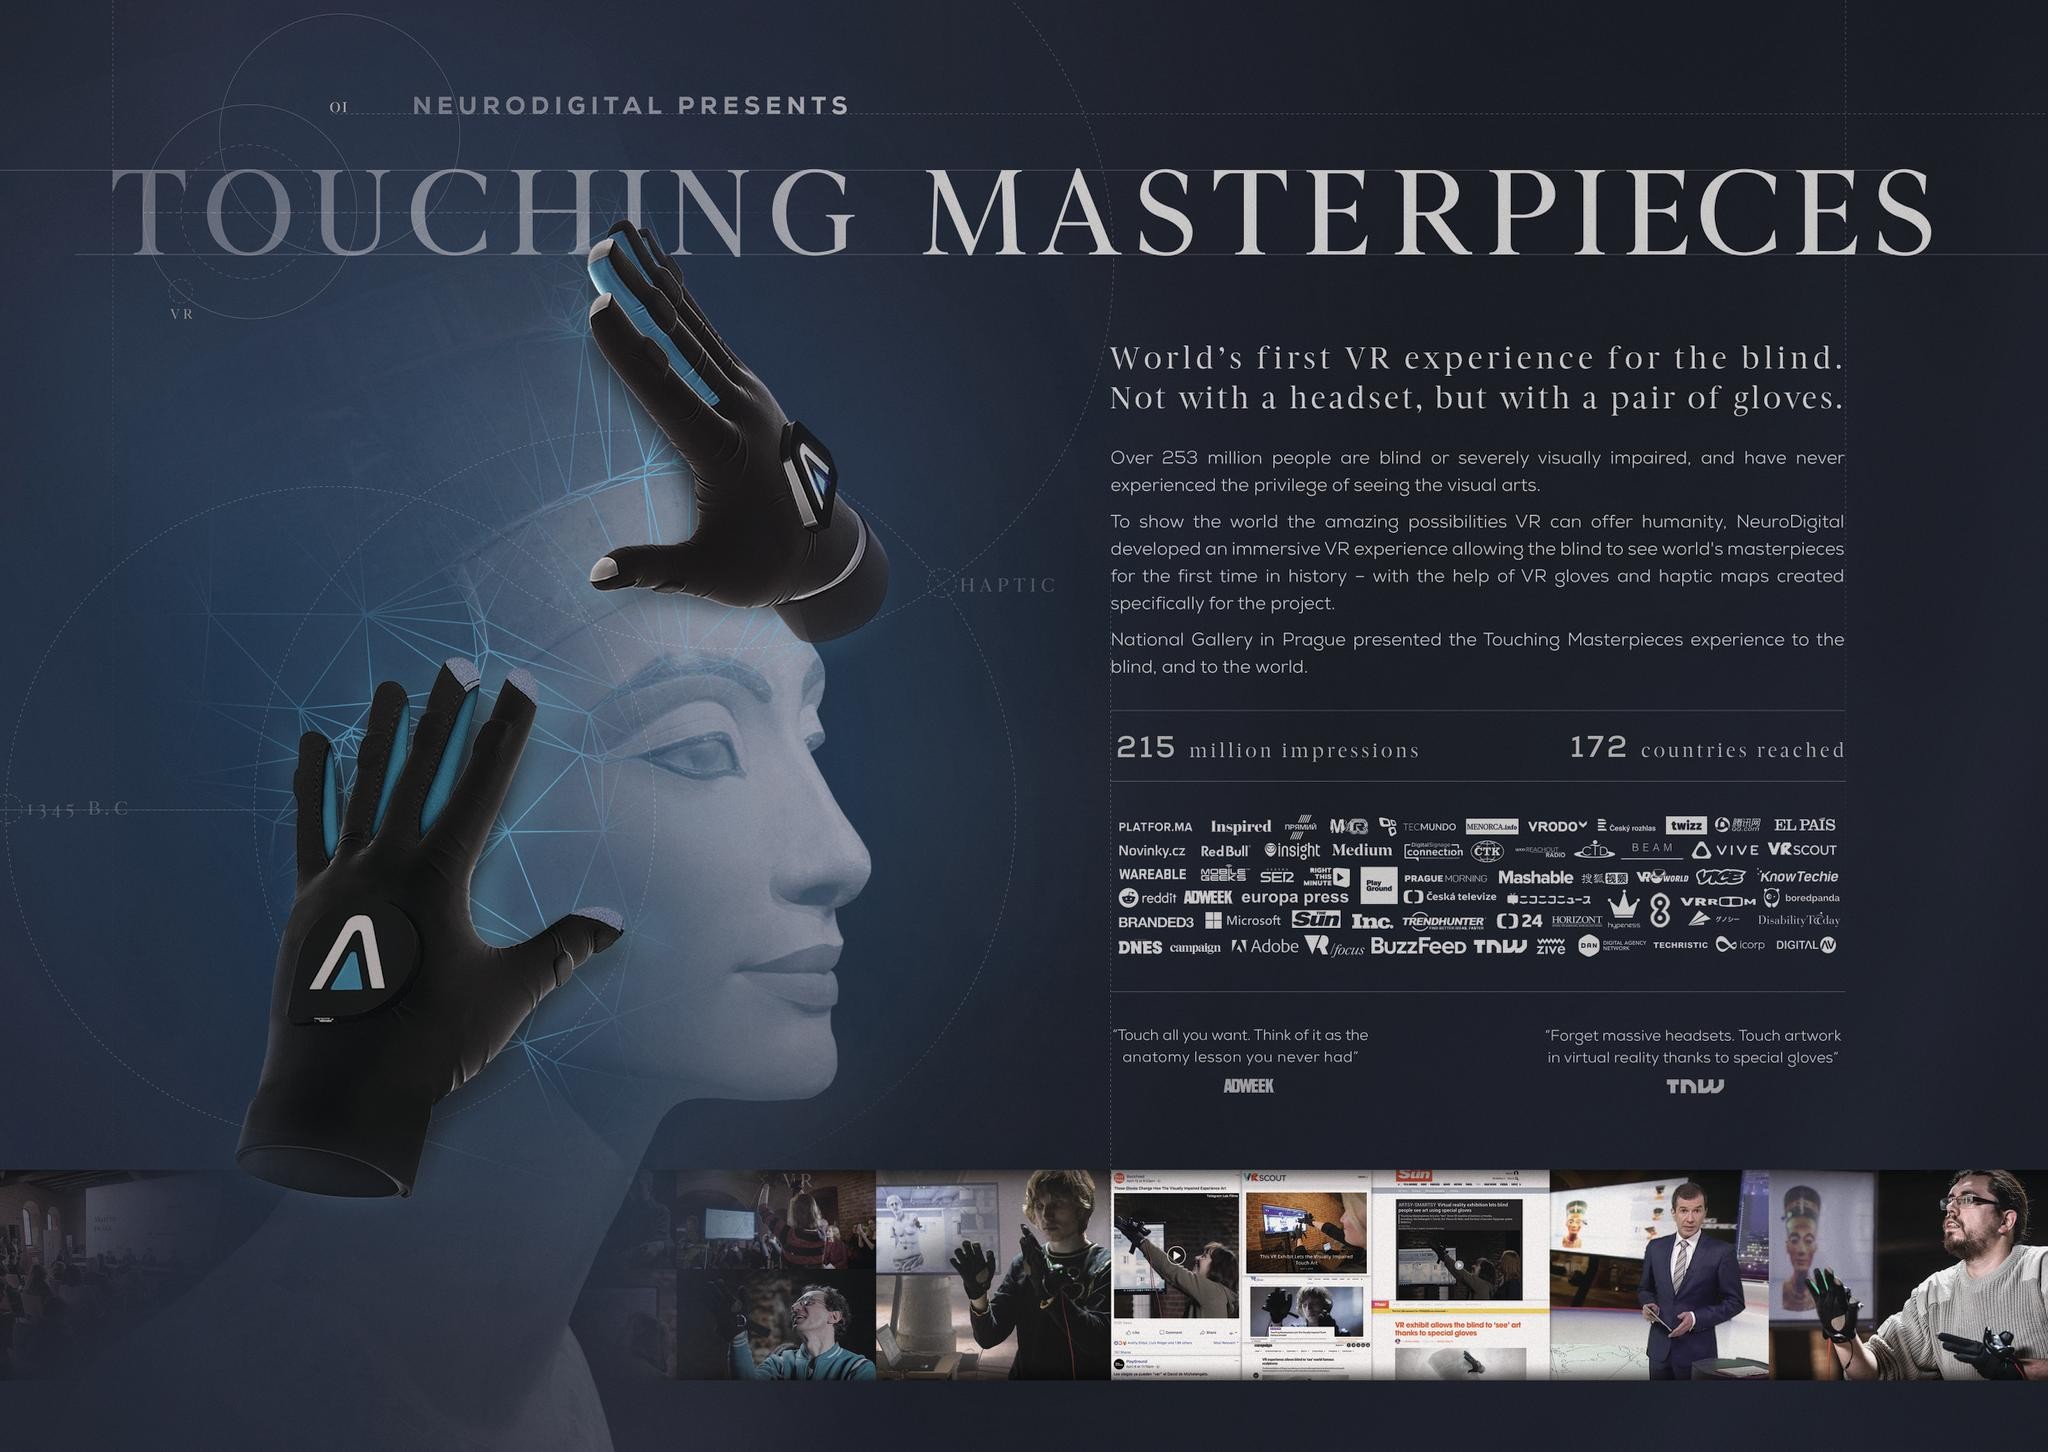 TOUCHING MASTERPIECES